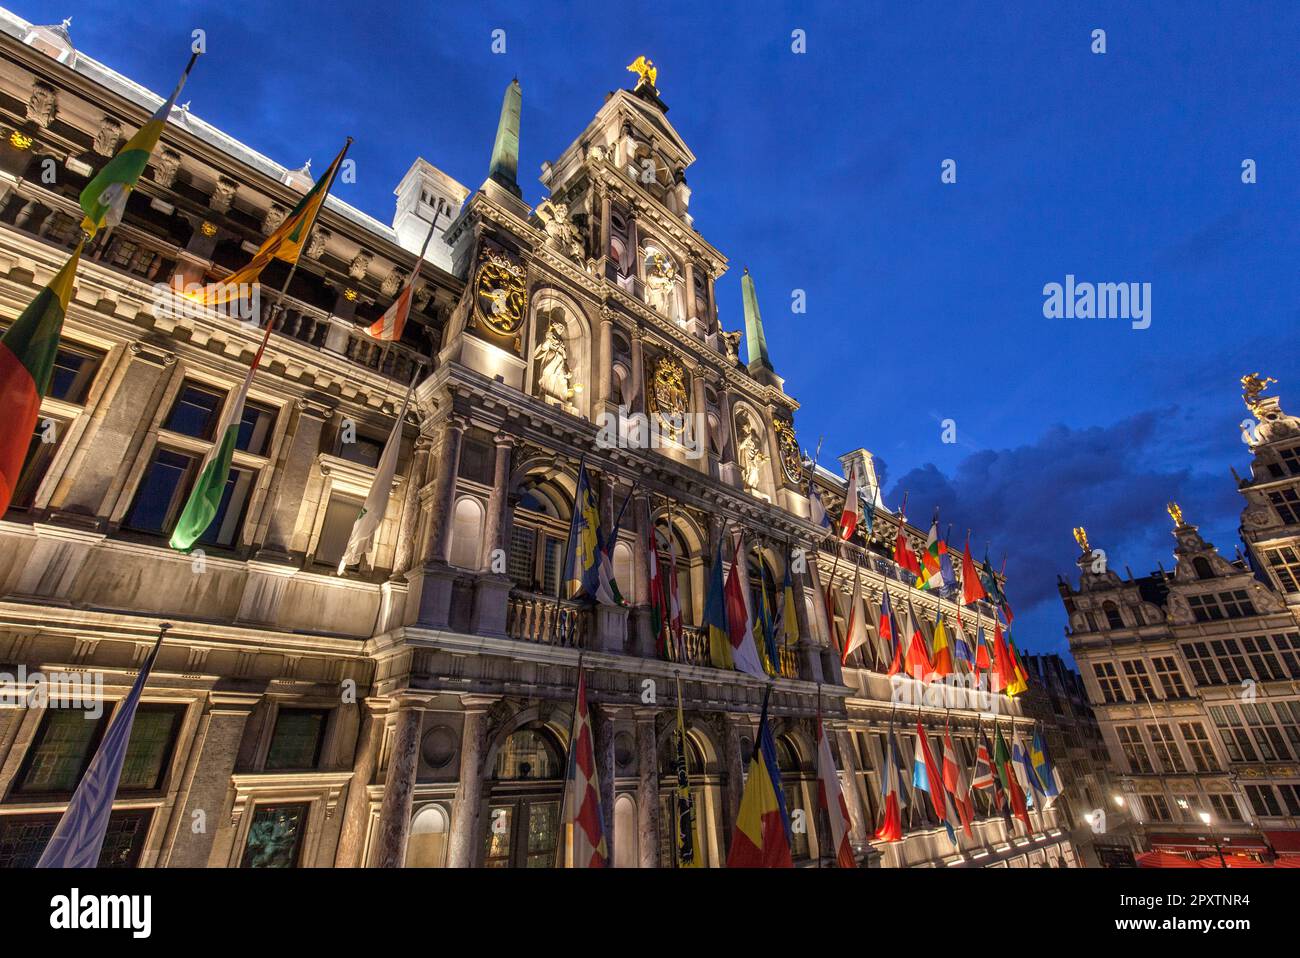 Historic renaissance style town hall, stadhuis, from 16th century with flags at twilight in Grote Markt, Old Town, Antwerp. UNESCO world heritage site Stock Photo